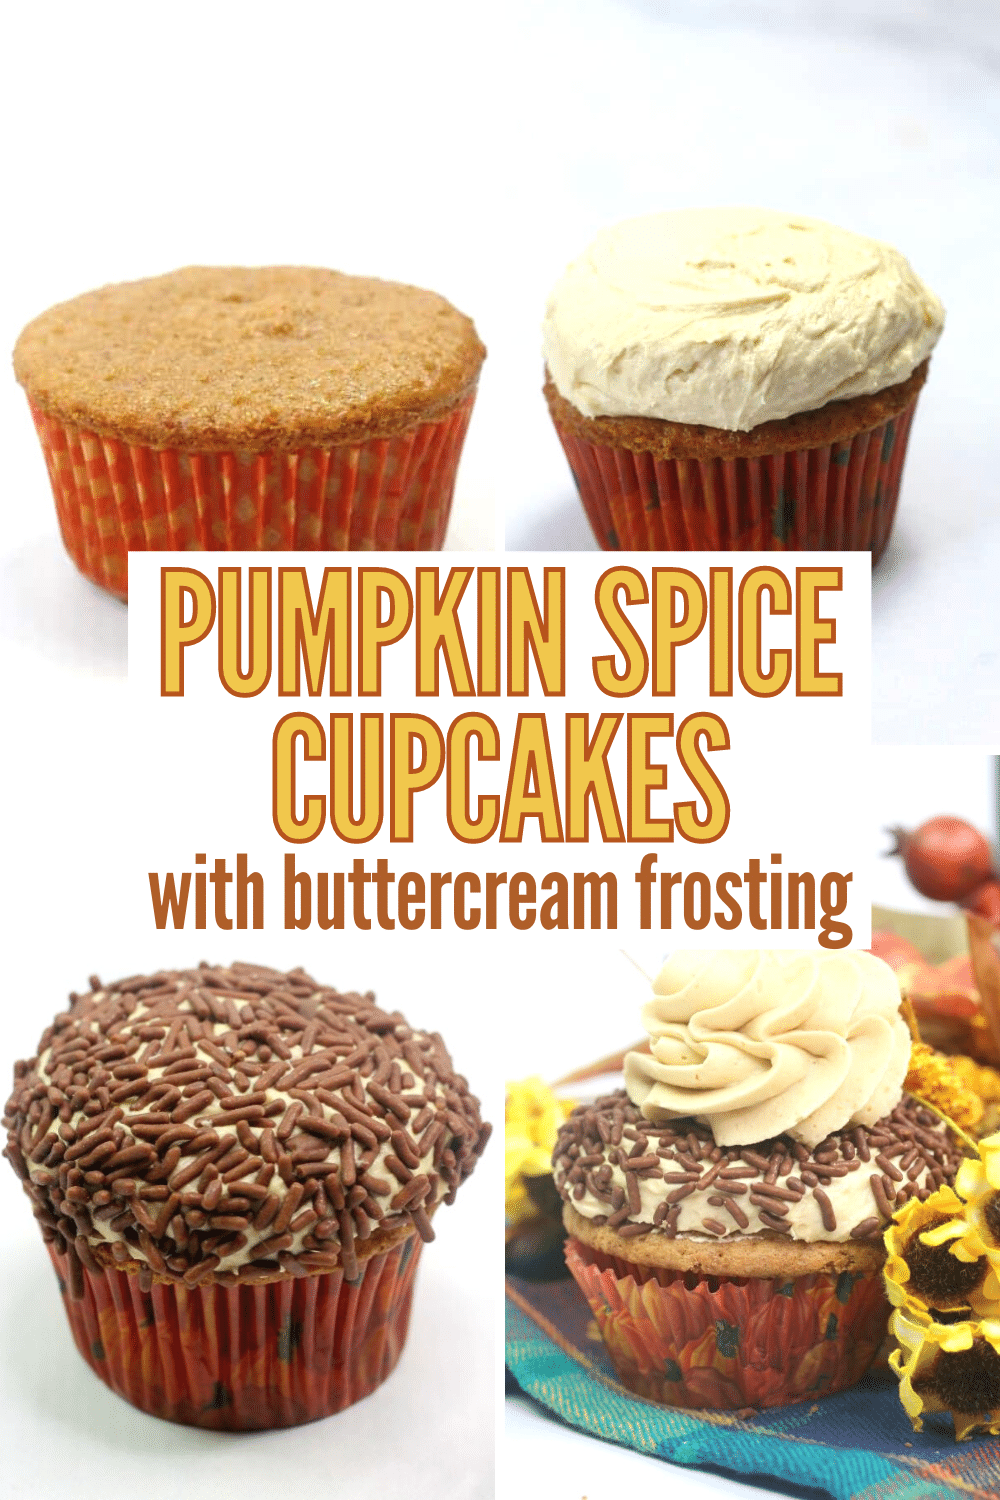 Made from scratch, these pumpkin spice cupcakes are everything great about Fall. Topped with a buttercream frosting made with Bailey's pumpkin spice liqueur, they're pure bliss! #cupcakes #pumpkinspice #FallFood via @wondermomwannab